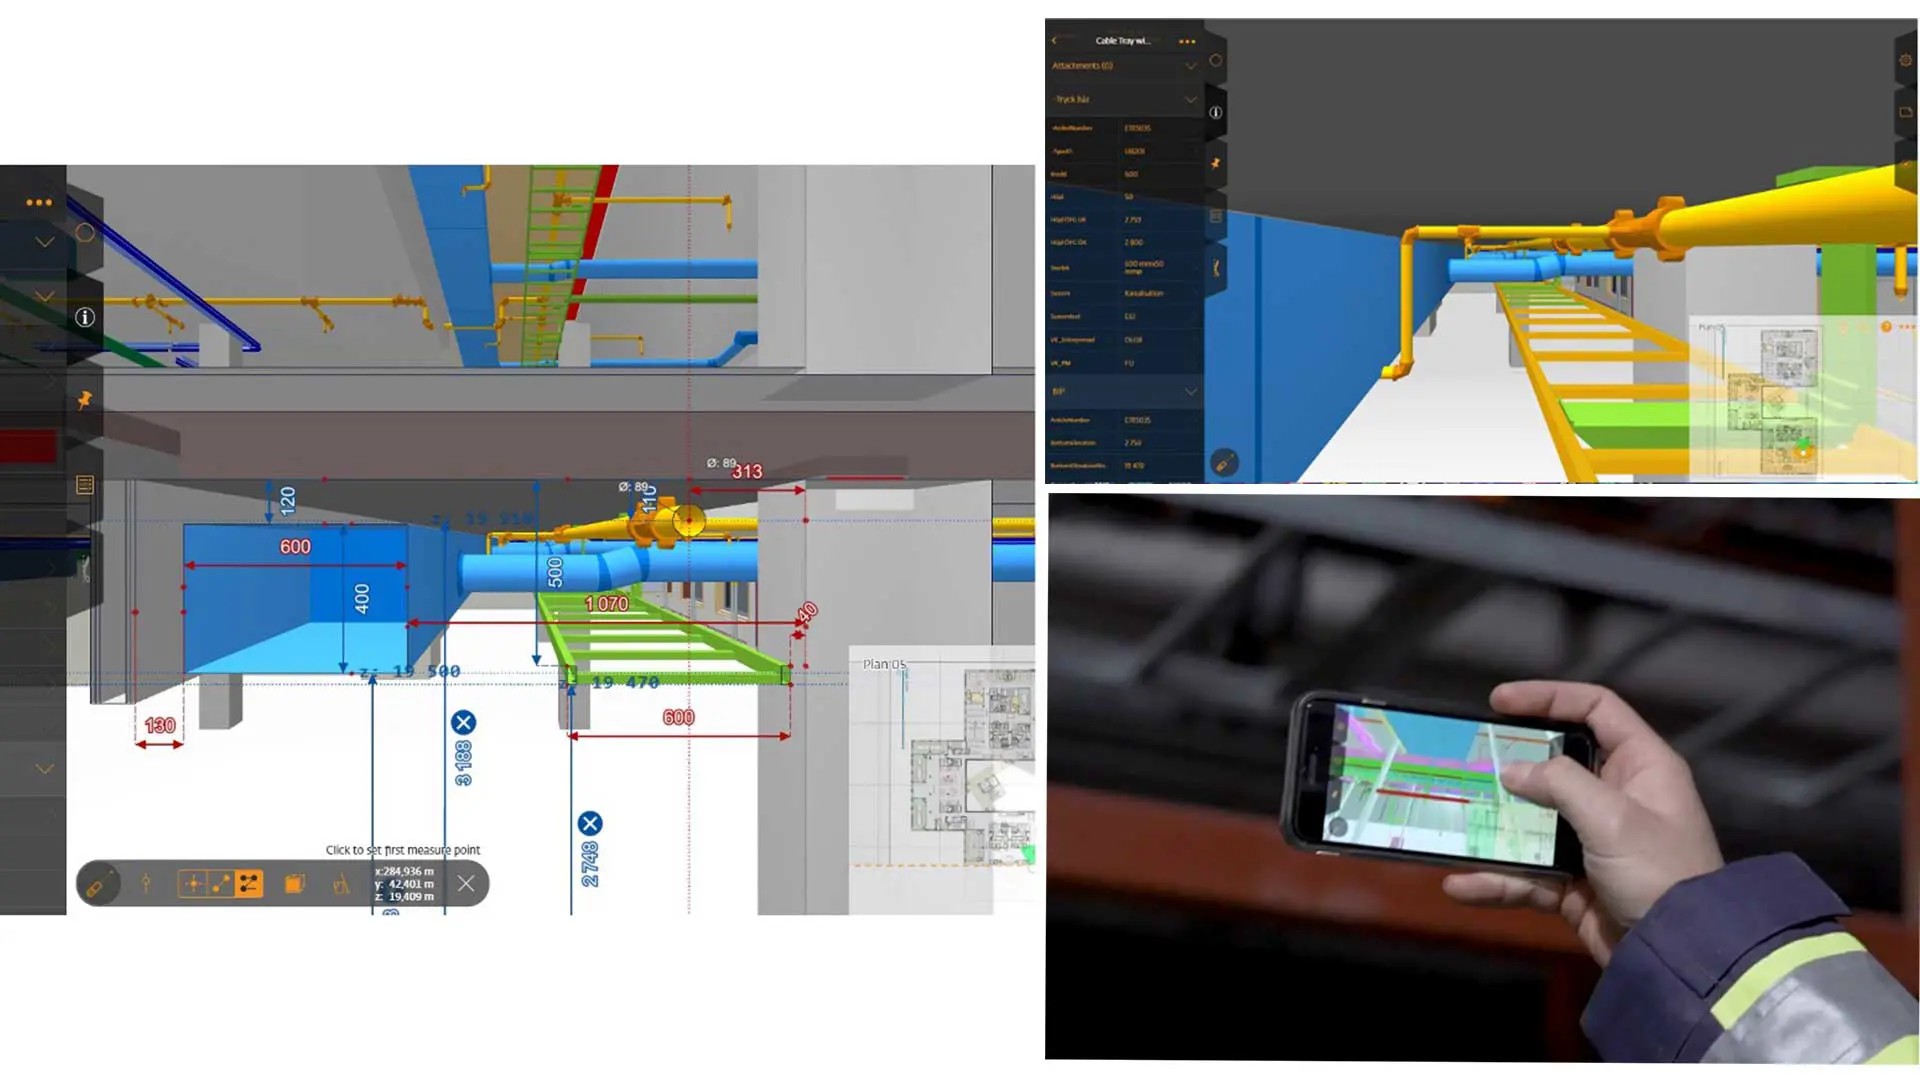 Collage: BIM model views and a photo of ahnad holding a smartphone